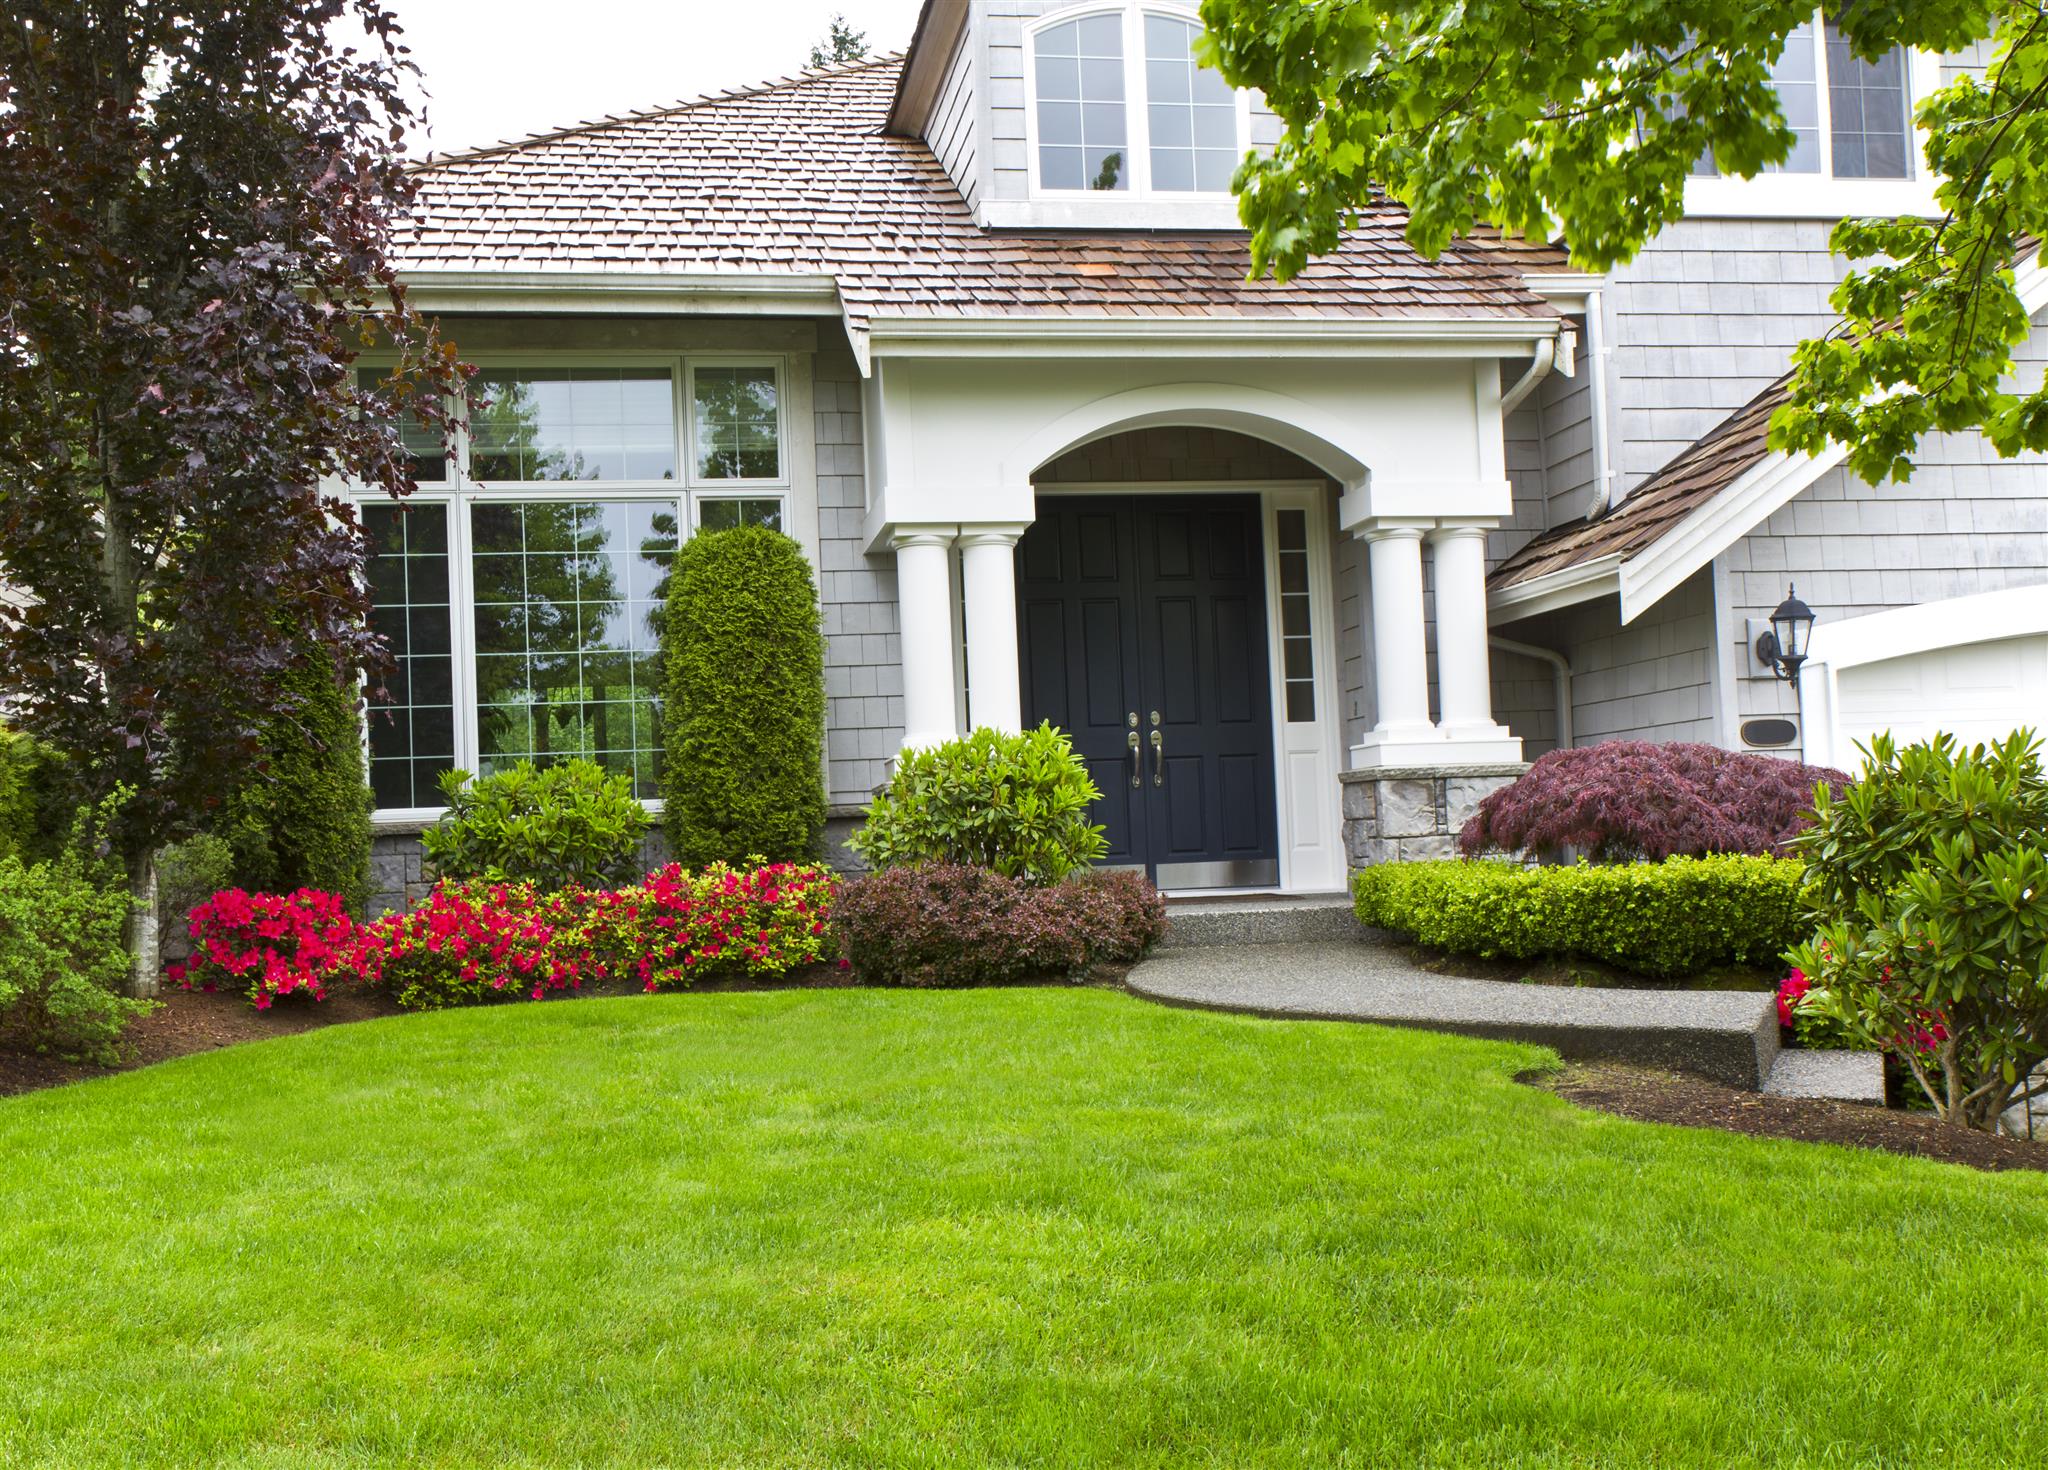 Top 10 Front Yard Eye-Catching Landscaping Ideas For Homes